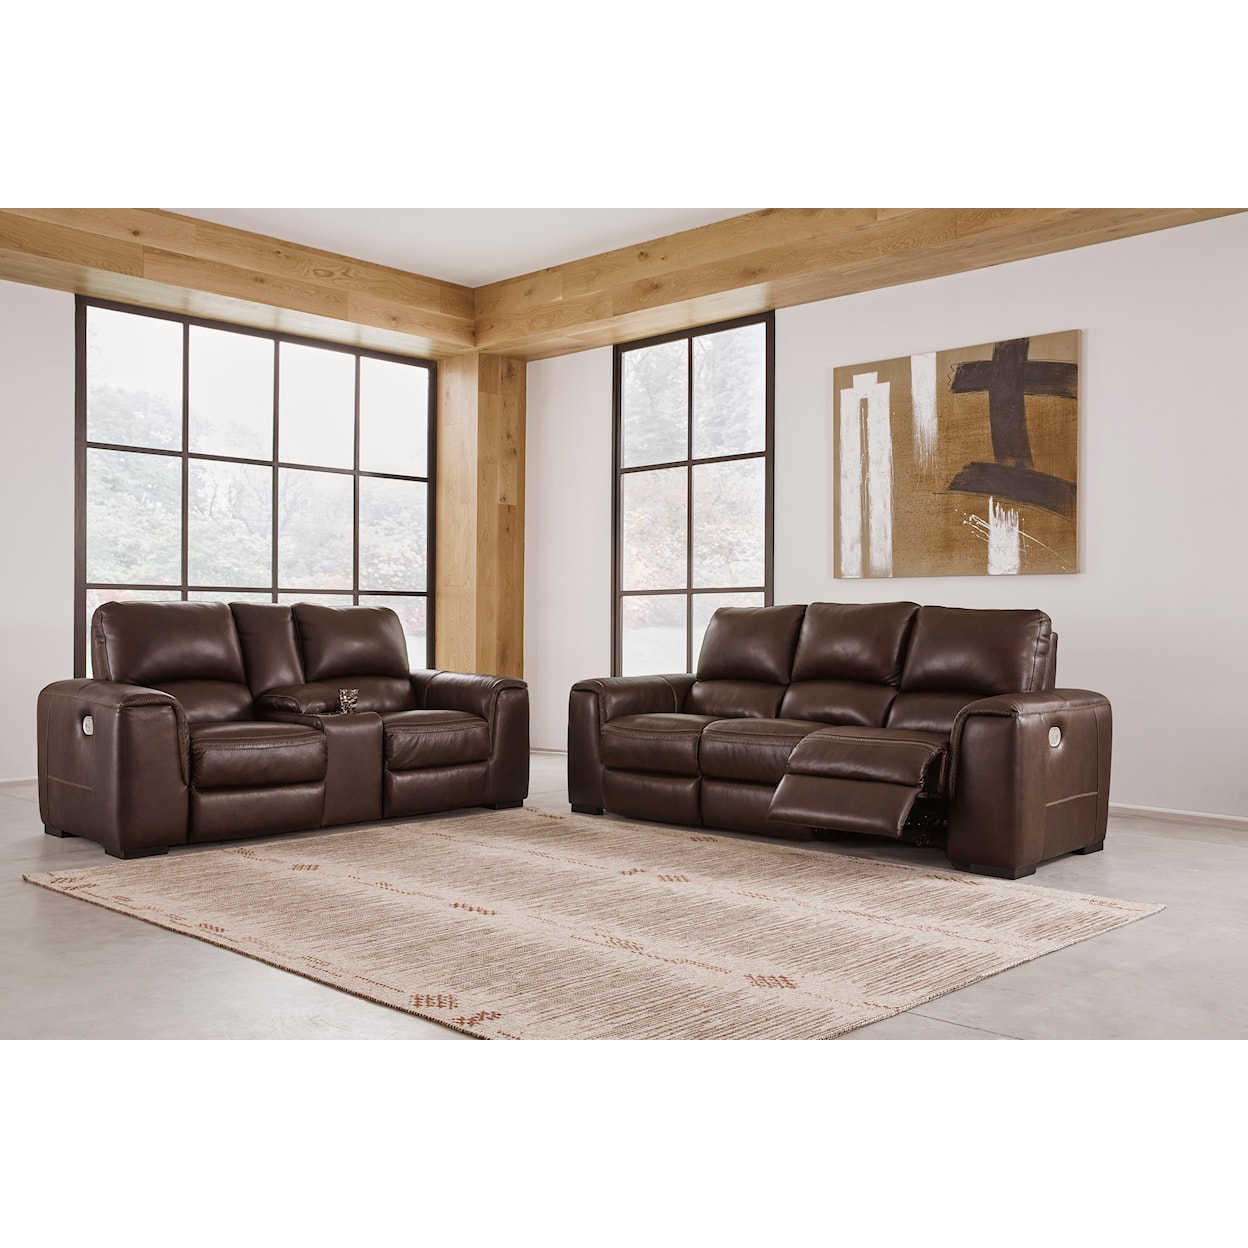 Signature Design by Ashley Alessandro Living Room Set